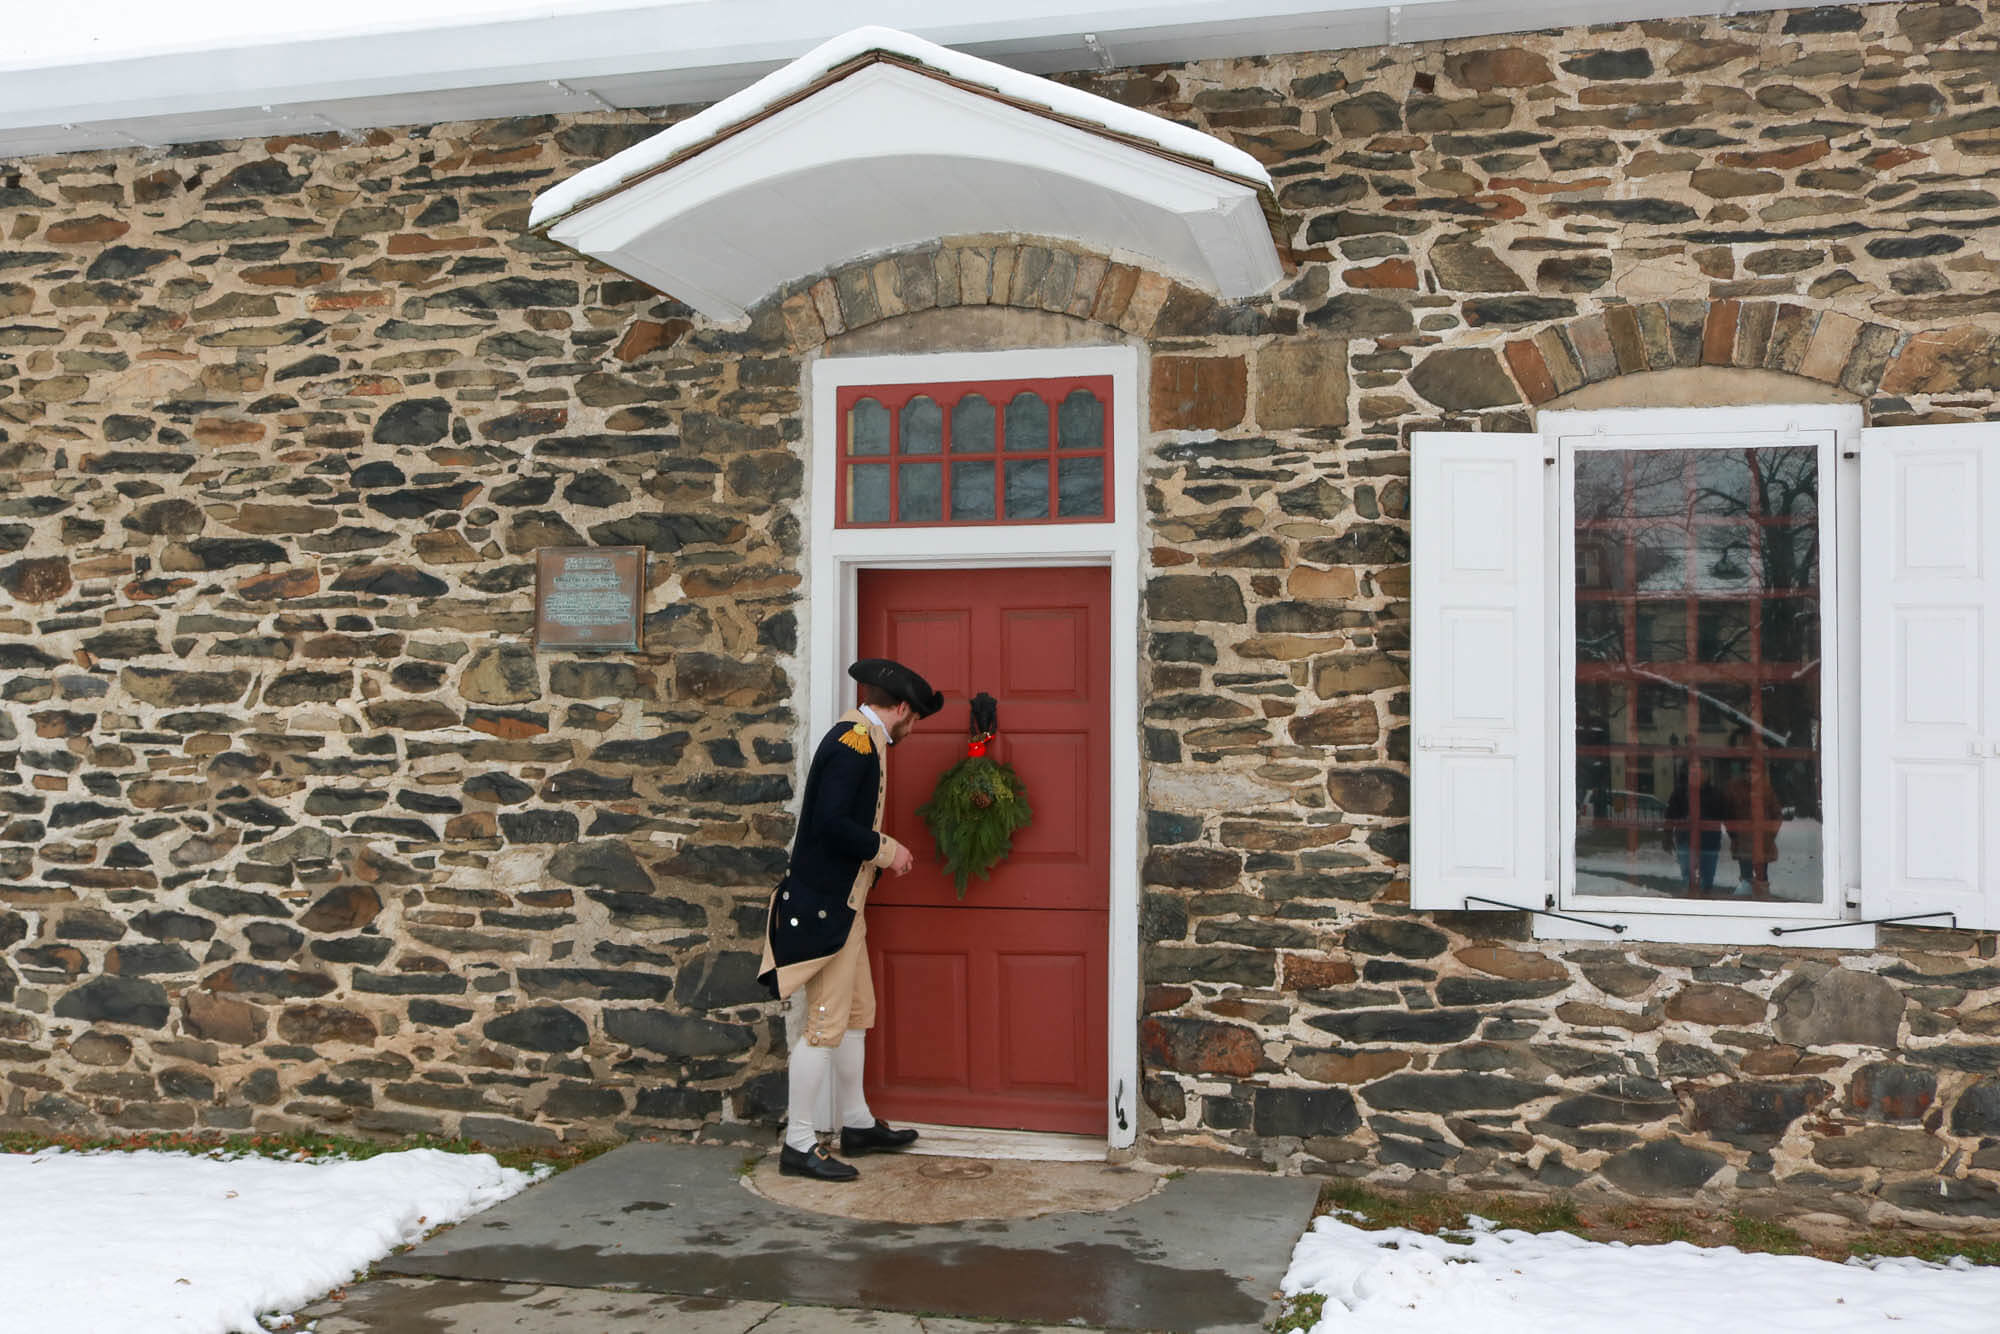 costumed soldier at the front door of the stone building